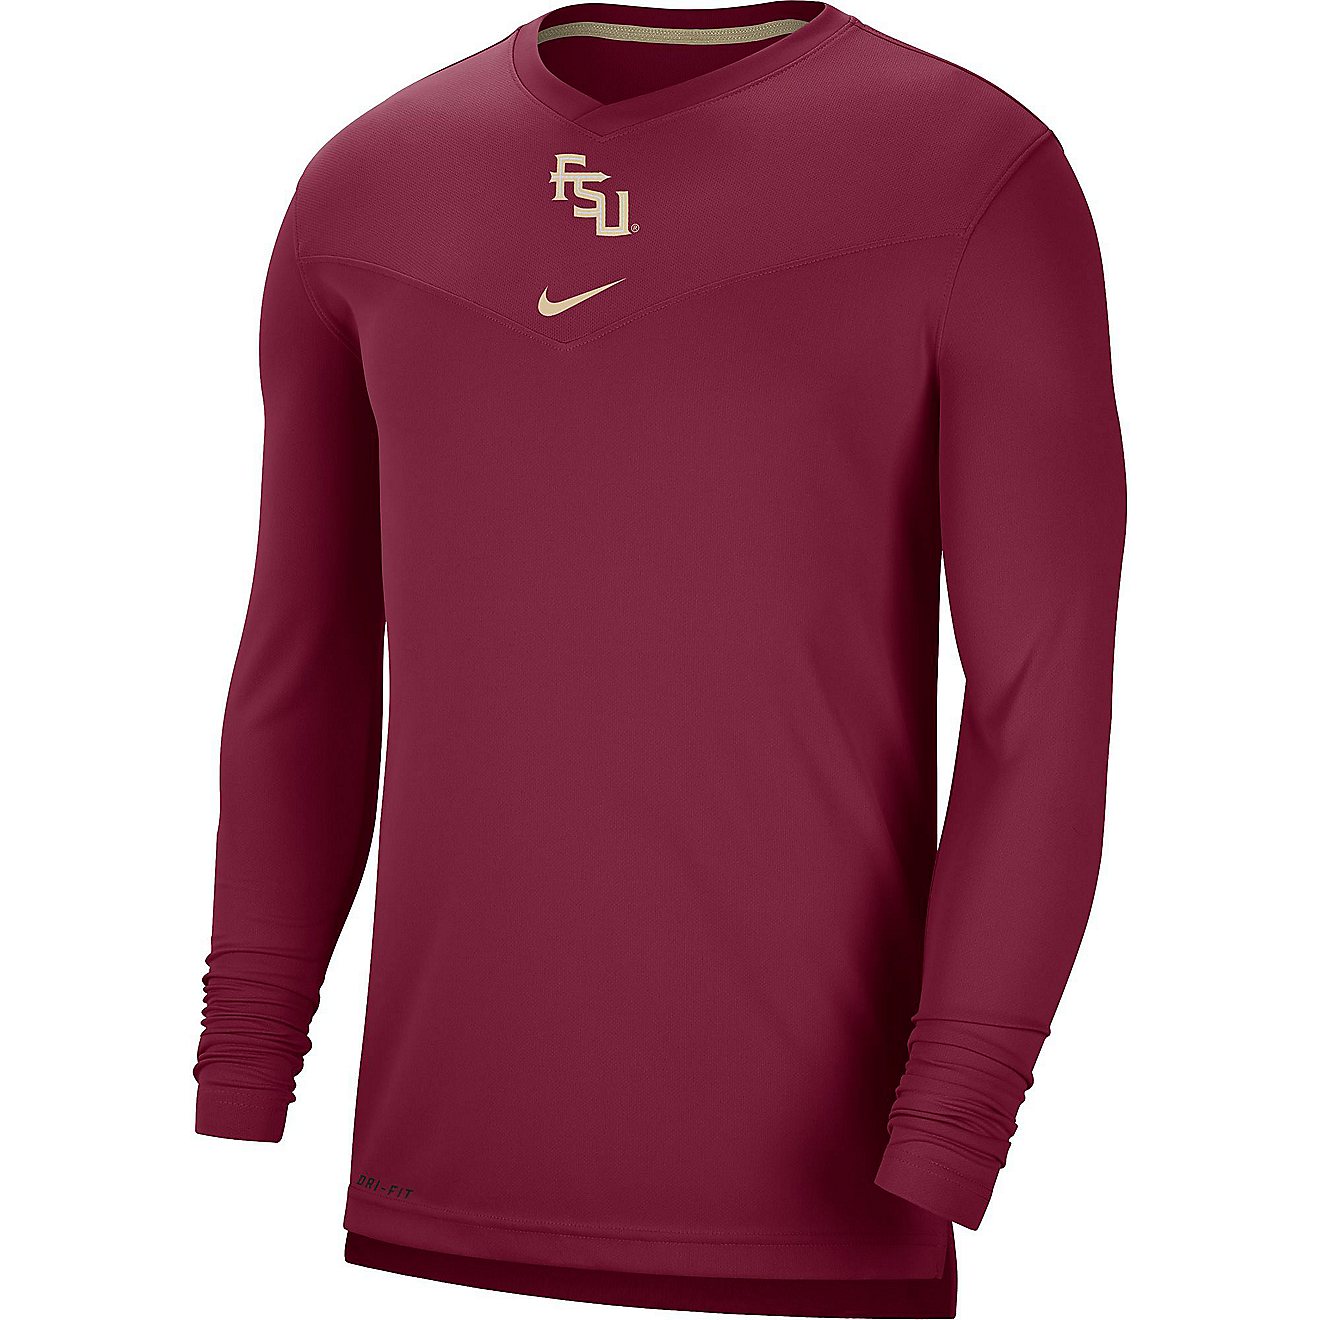 Nike Men's Florida State University Coach UV Long Sleeve Top                                                                     - view number 1